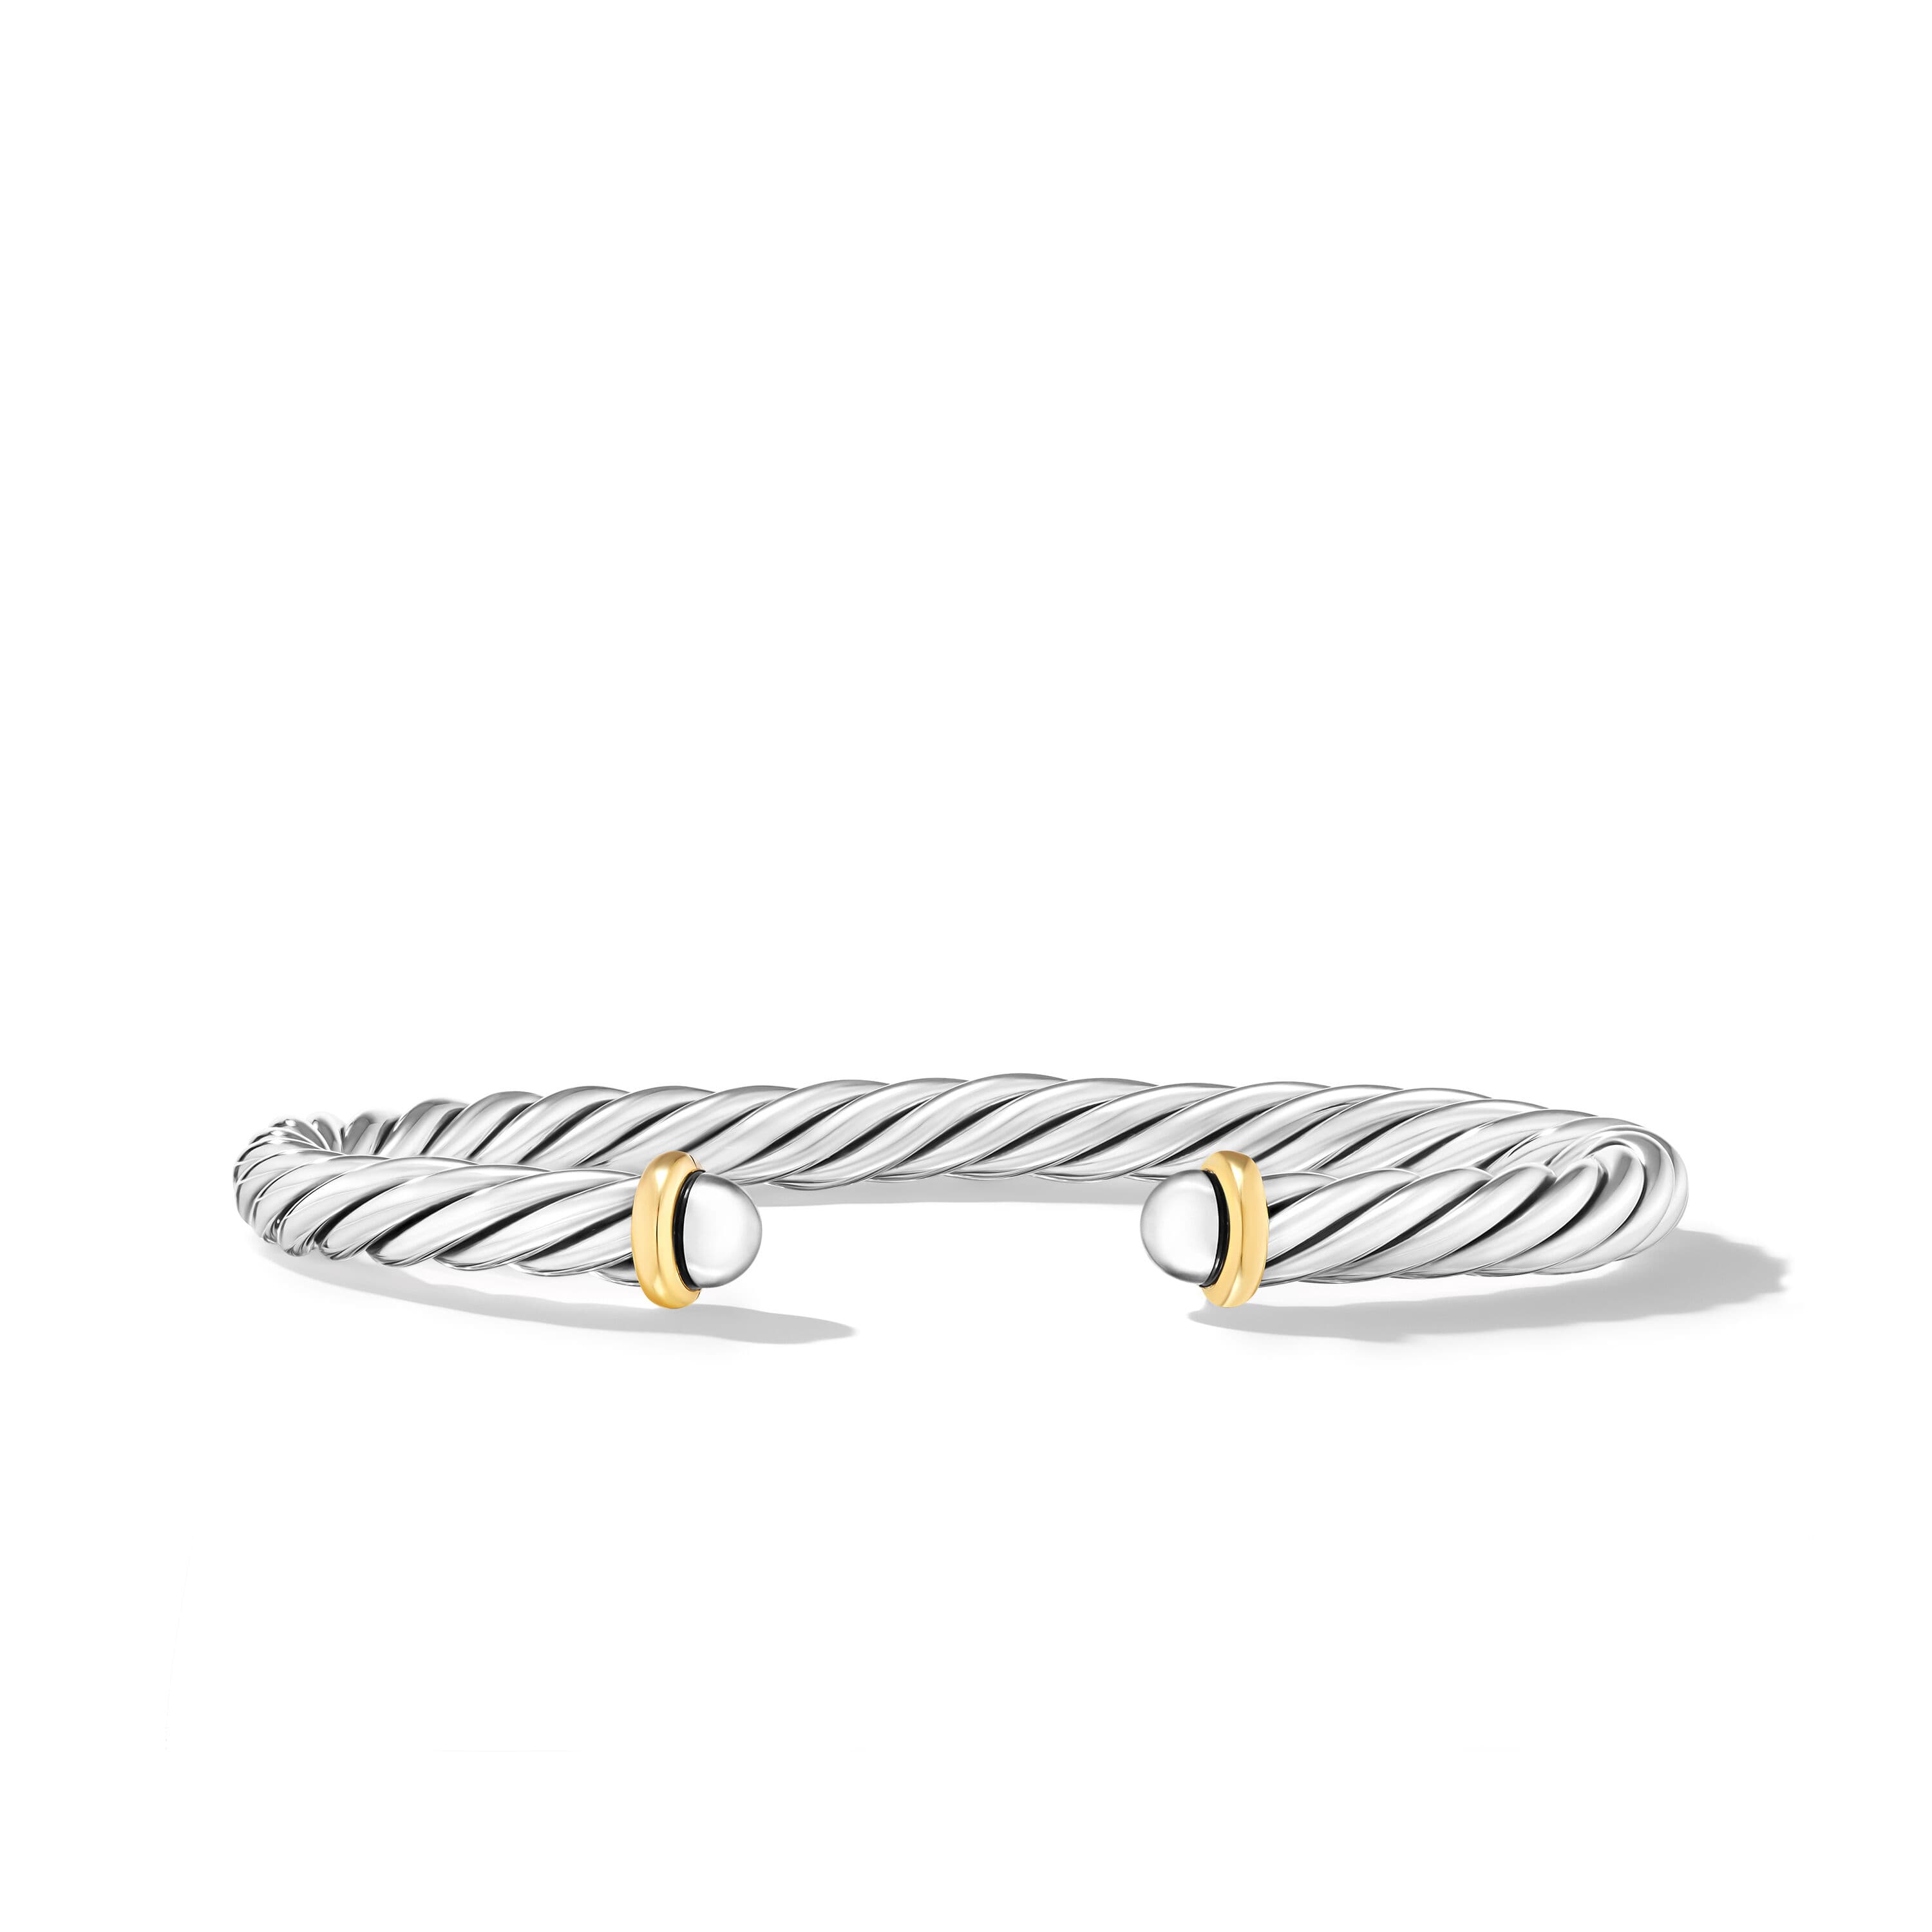 David Yurman 6mm Cable Cuff Bracelet in Sterling Silver with 14K Yellow Gold, Small